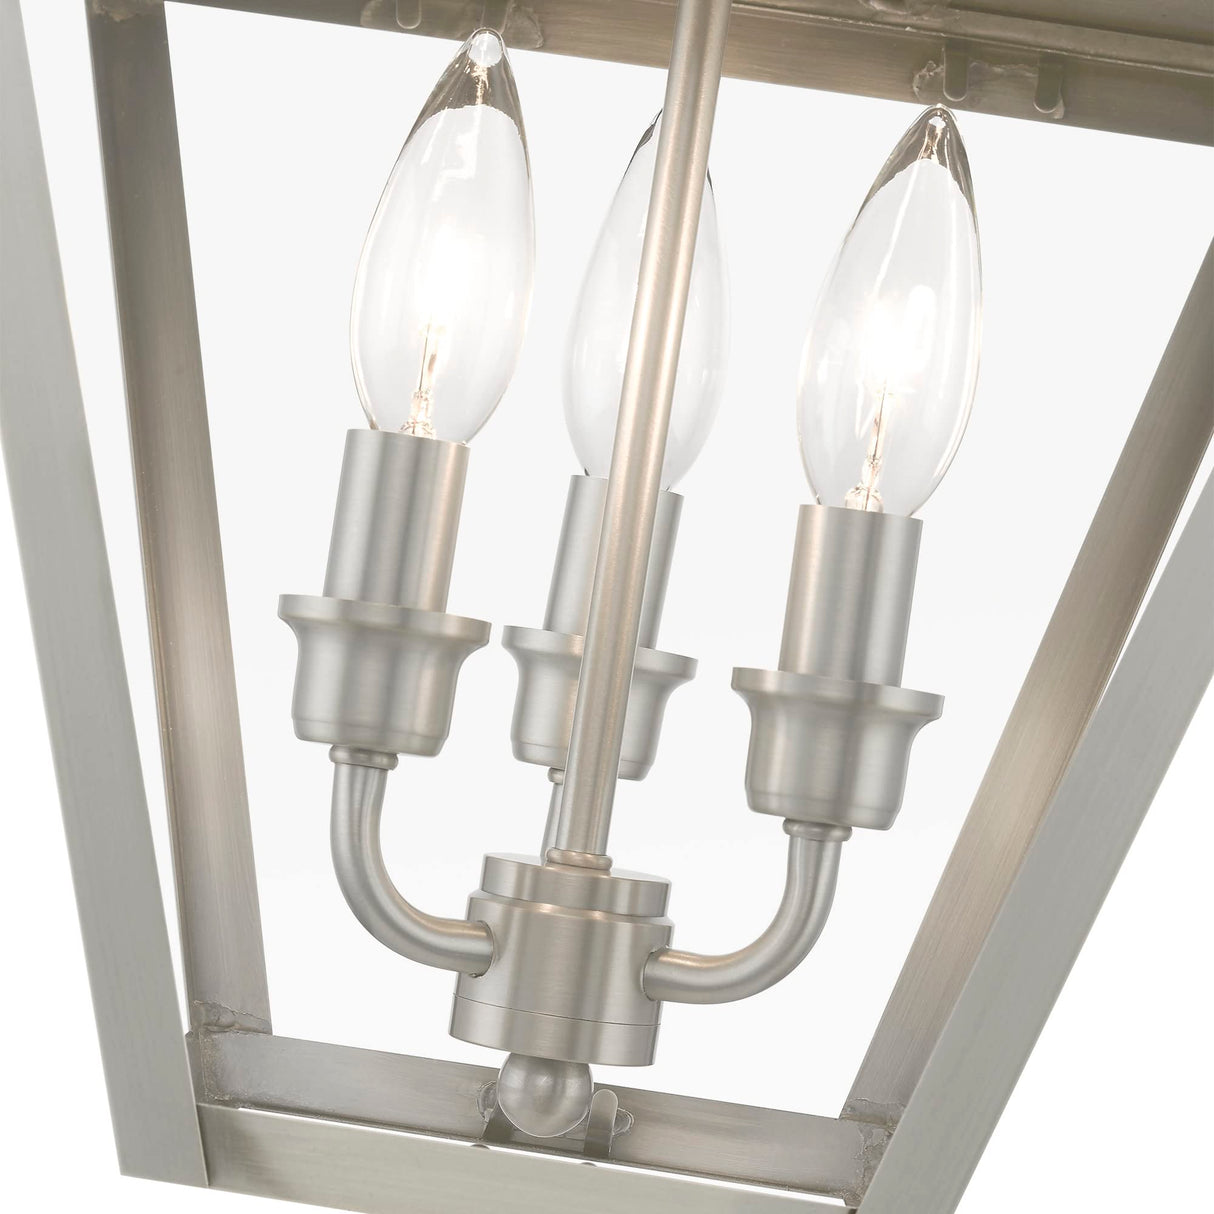 Wentworth 3 Light Outdoor Pendant in Brushed Nickel (27220-91)